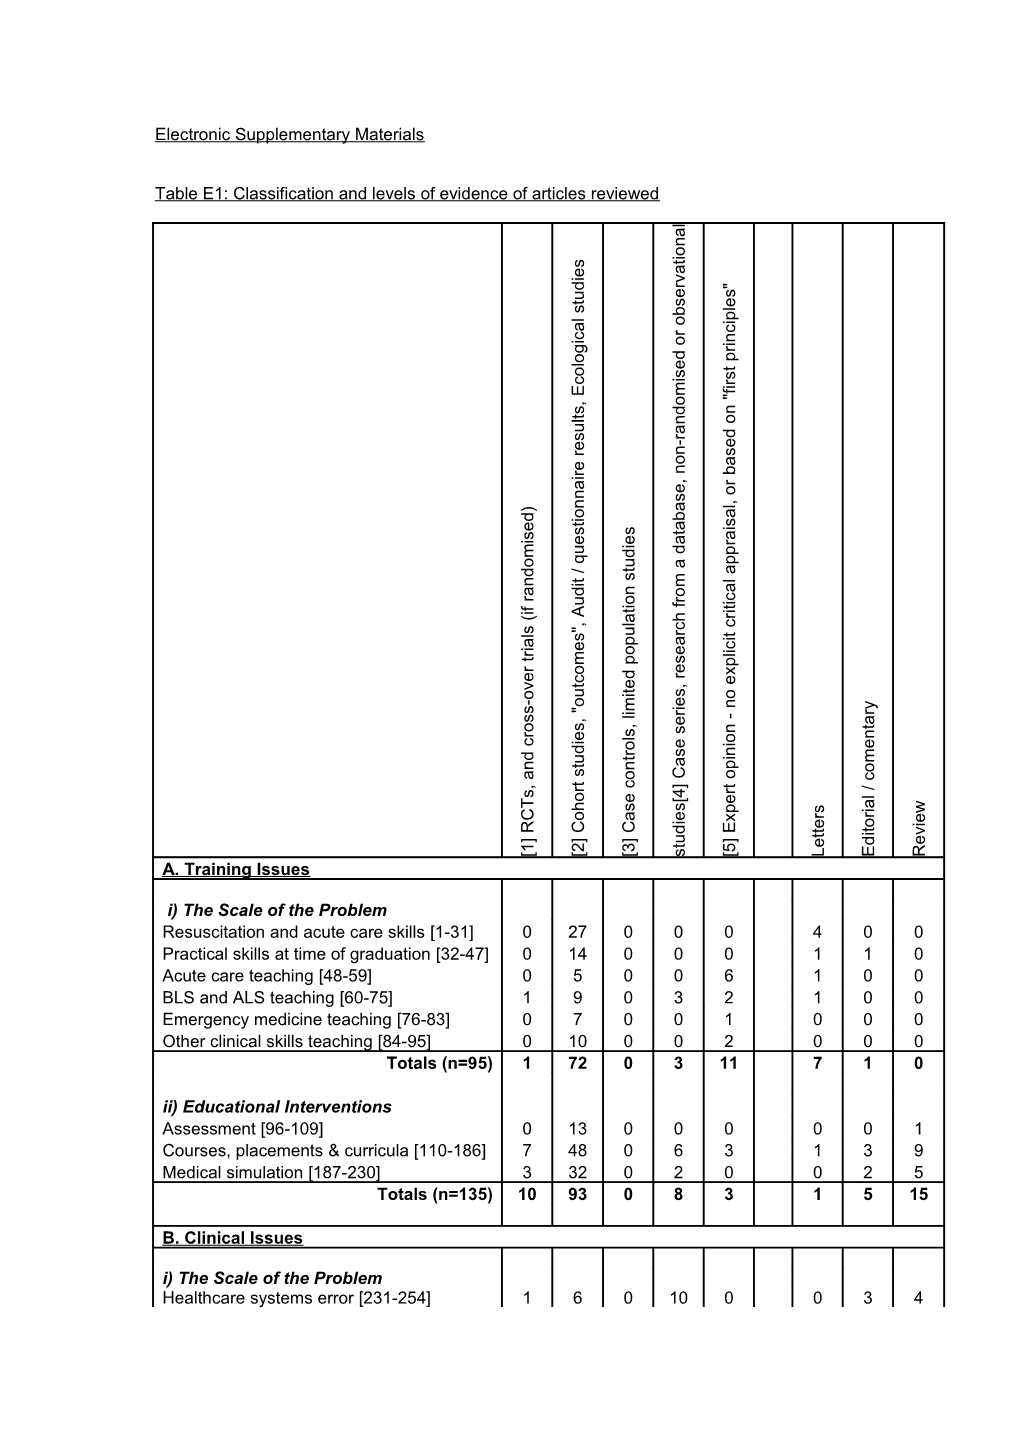 Table 2: Classification and Levels of Evidence of Articles Reviewed